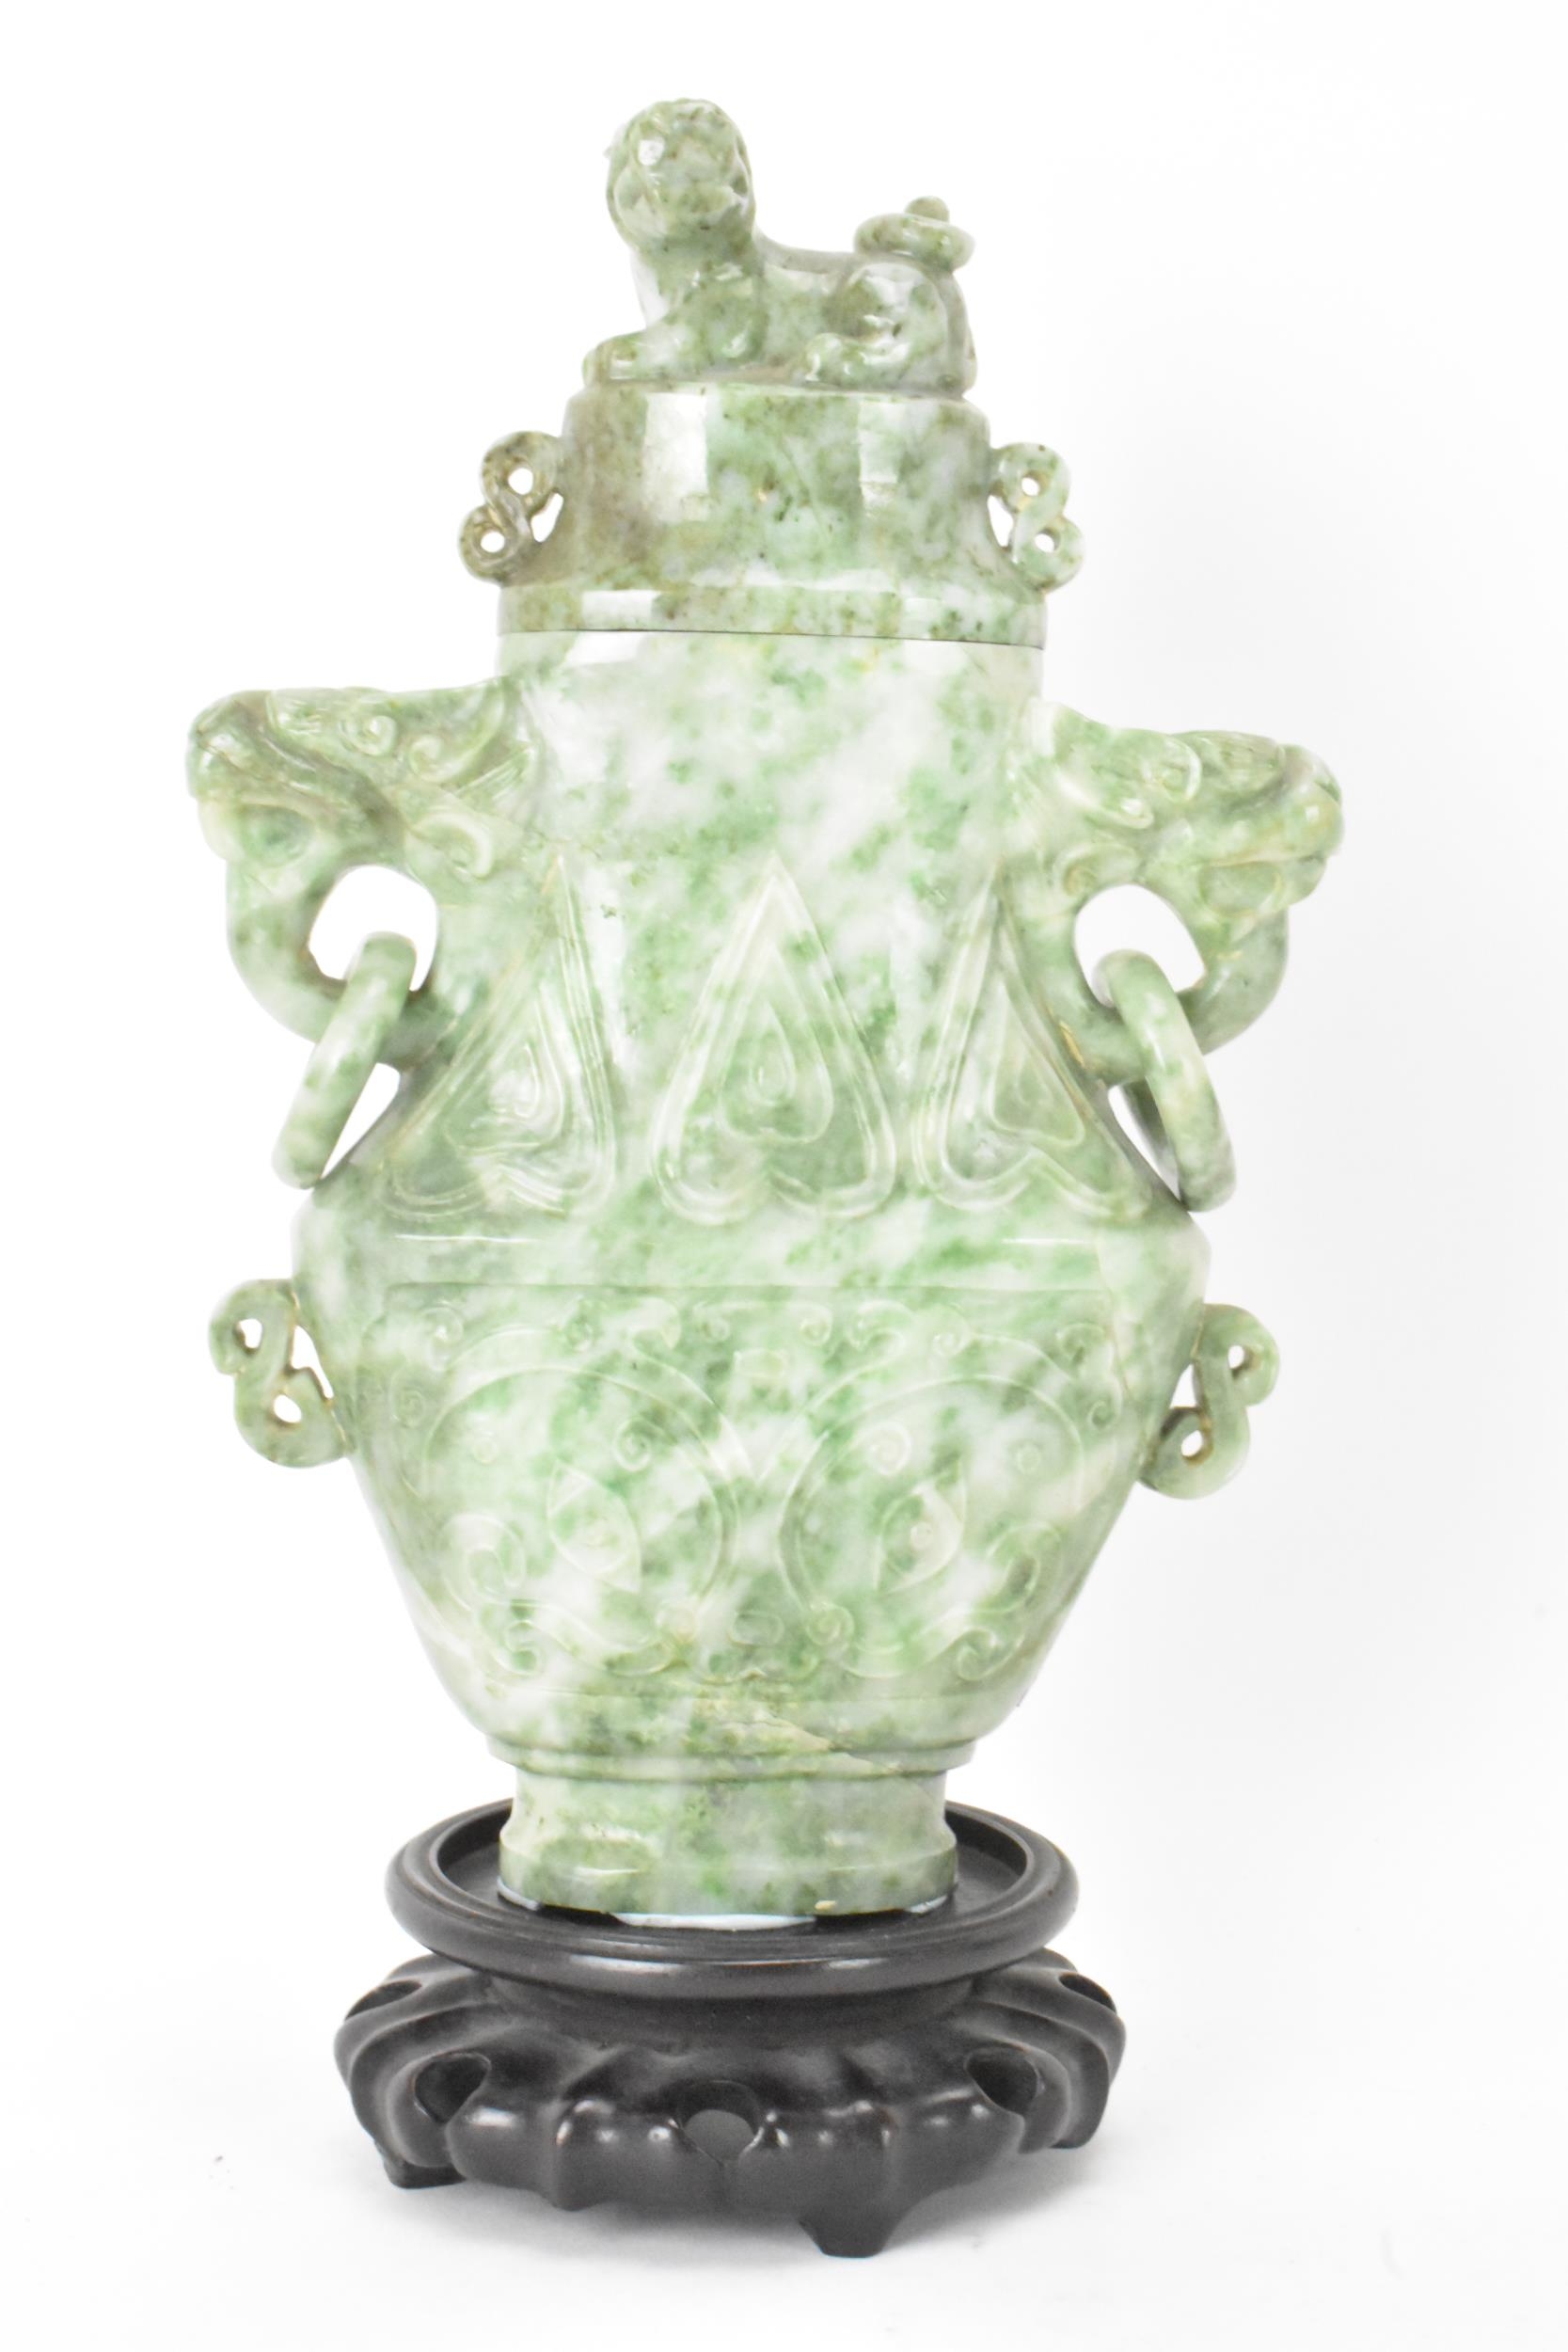 A Chinese 20th century jadeite vase, of flattened baluster shape with archaistic relief